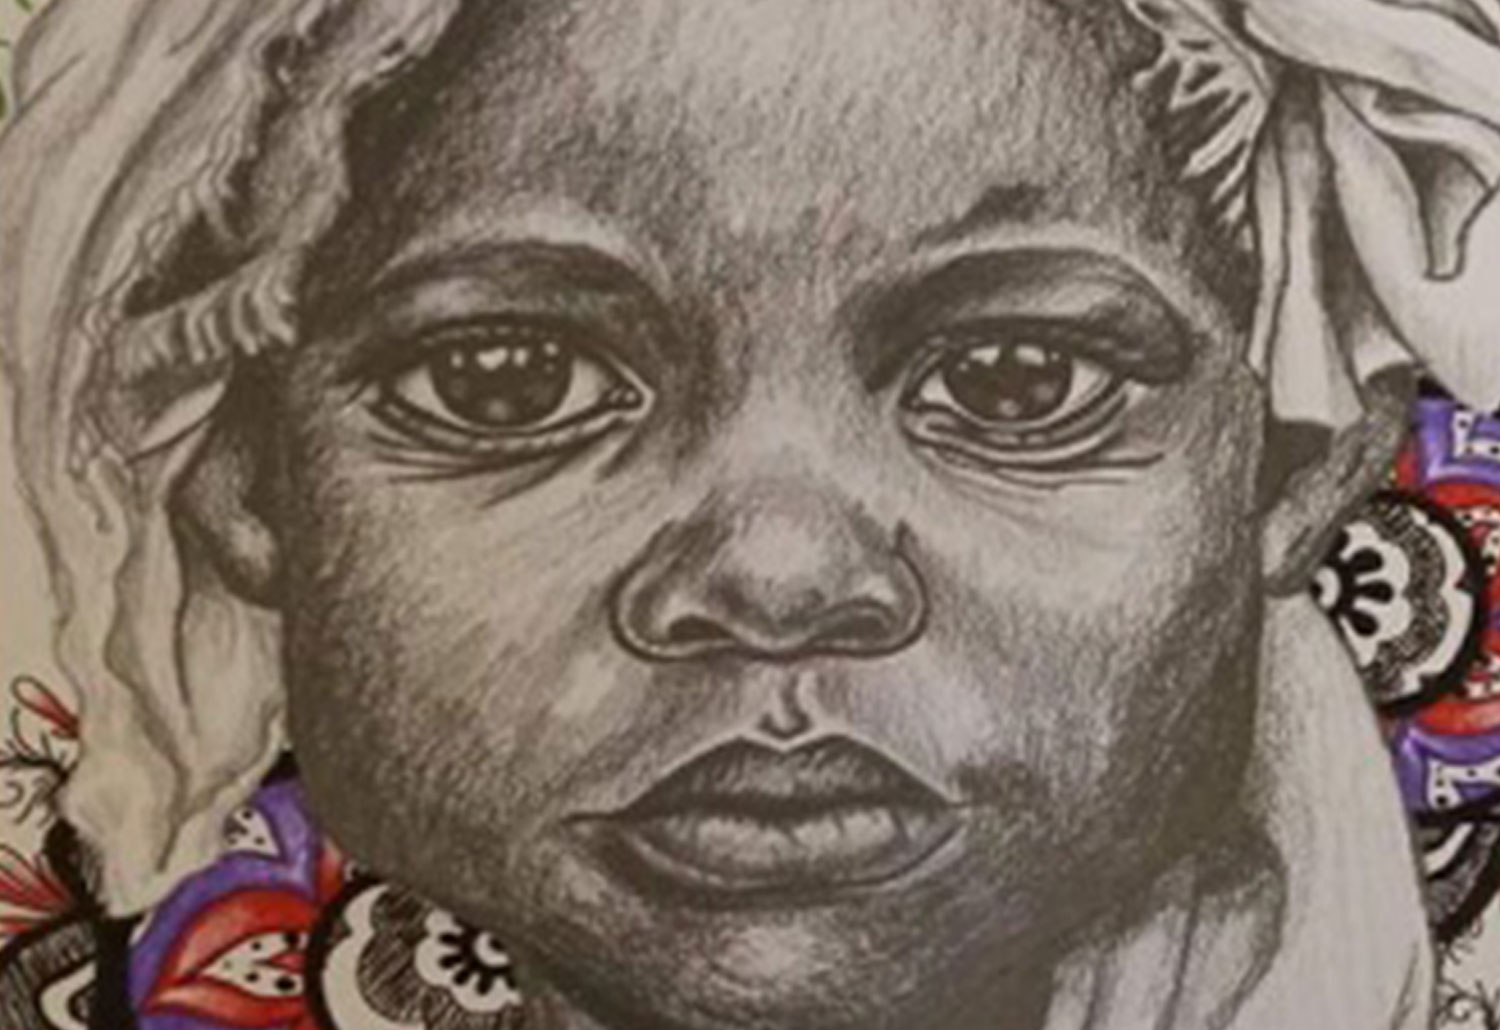 "Princess" by Zakiya Newell. Pencil drawing of a baby with ornamental colored background